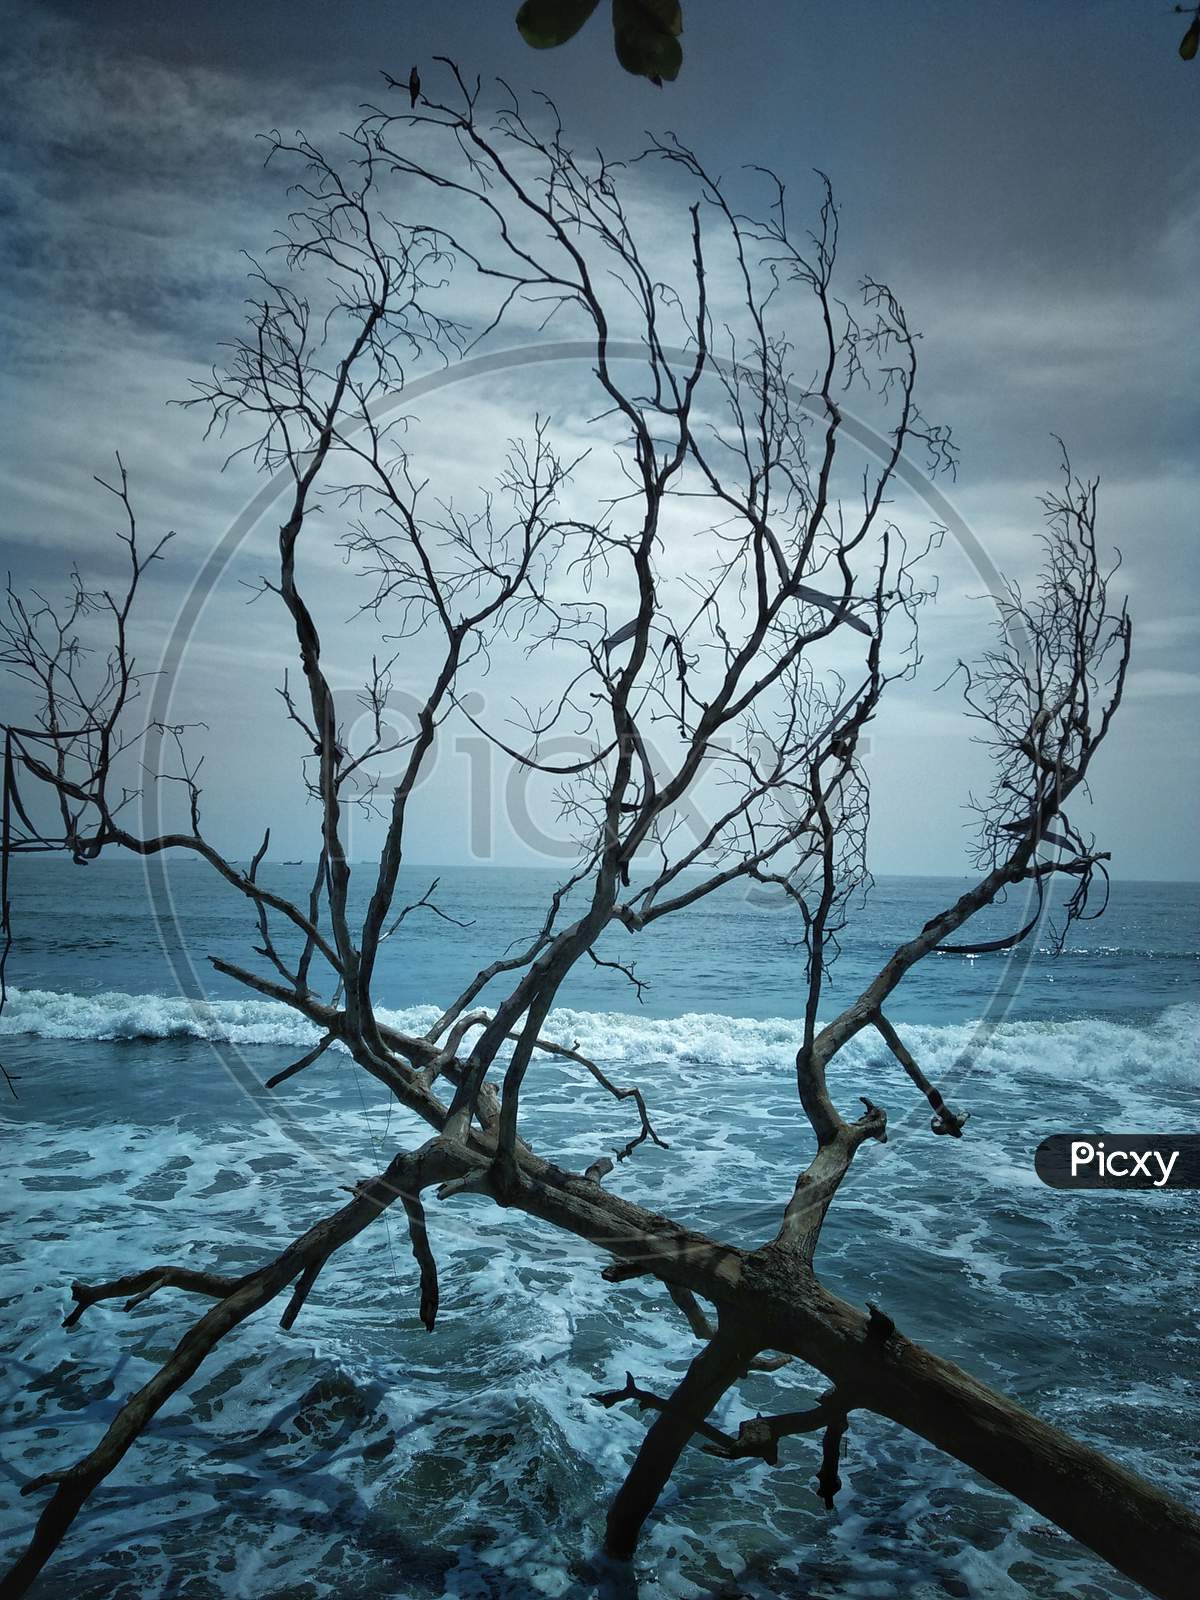 Canopy Of Leafless Tree At a Beach